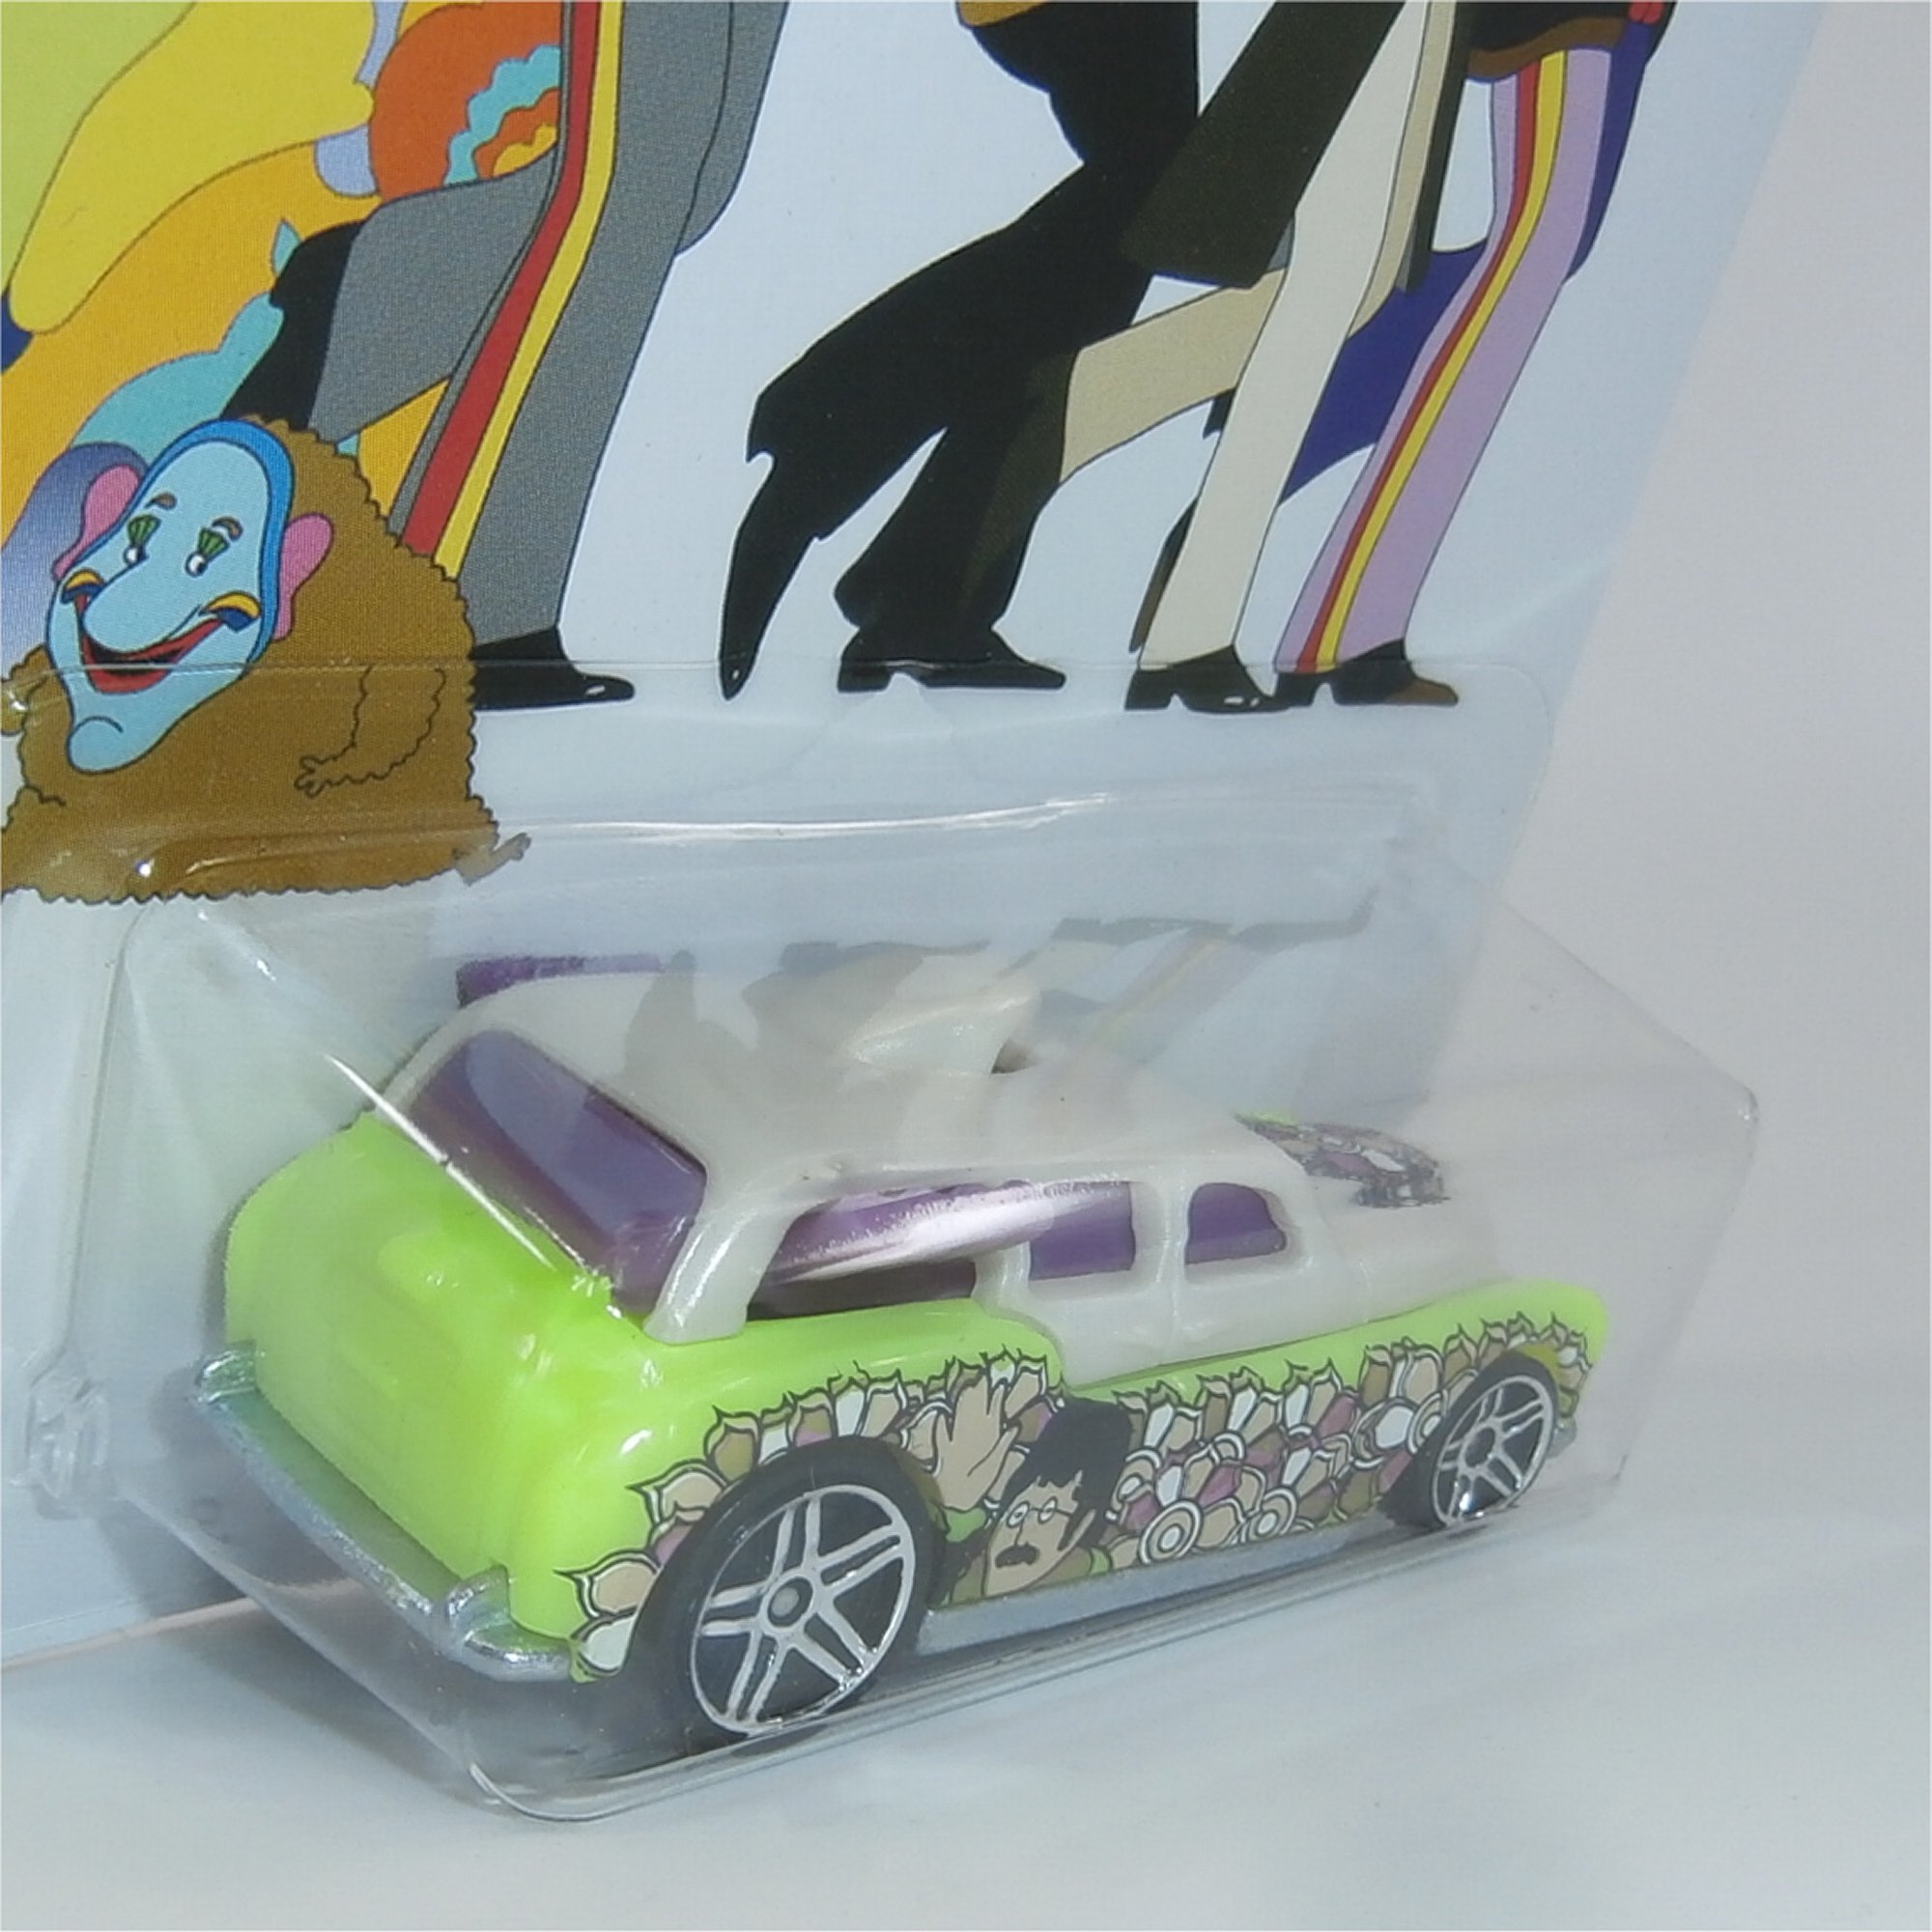 Cockney Cab 2 2016 Hot Wheels THE BEATLES 50th Anniversary YELLOW SUBMARINE 1:64 Scale Collectible Die Cast Metal Toy Car Model 2/6 by Hot Wheels 